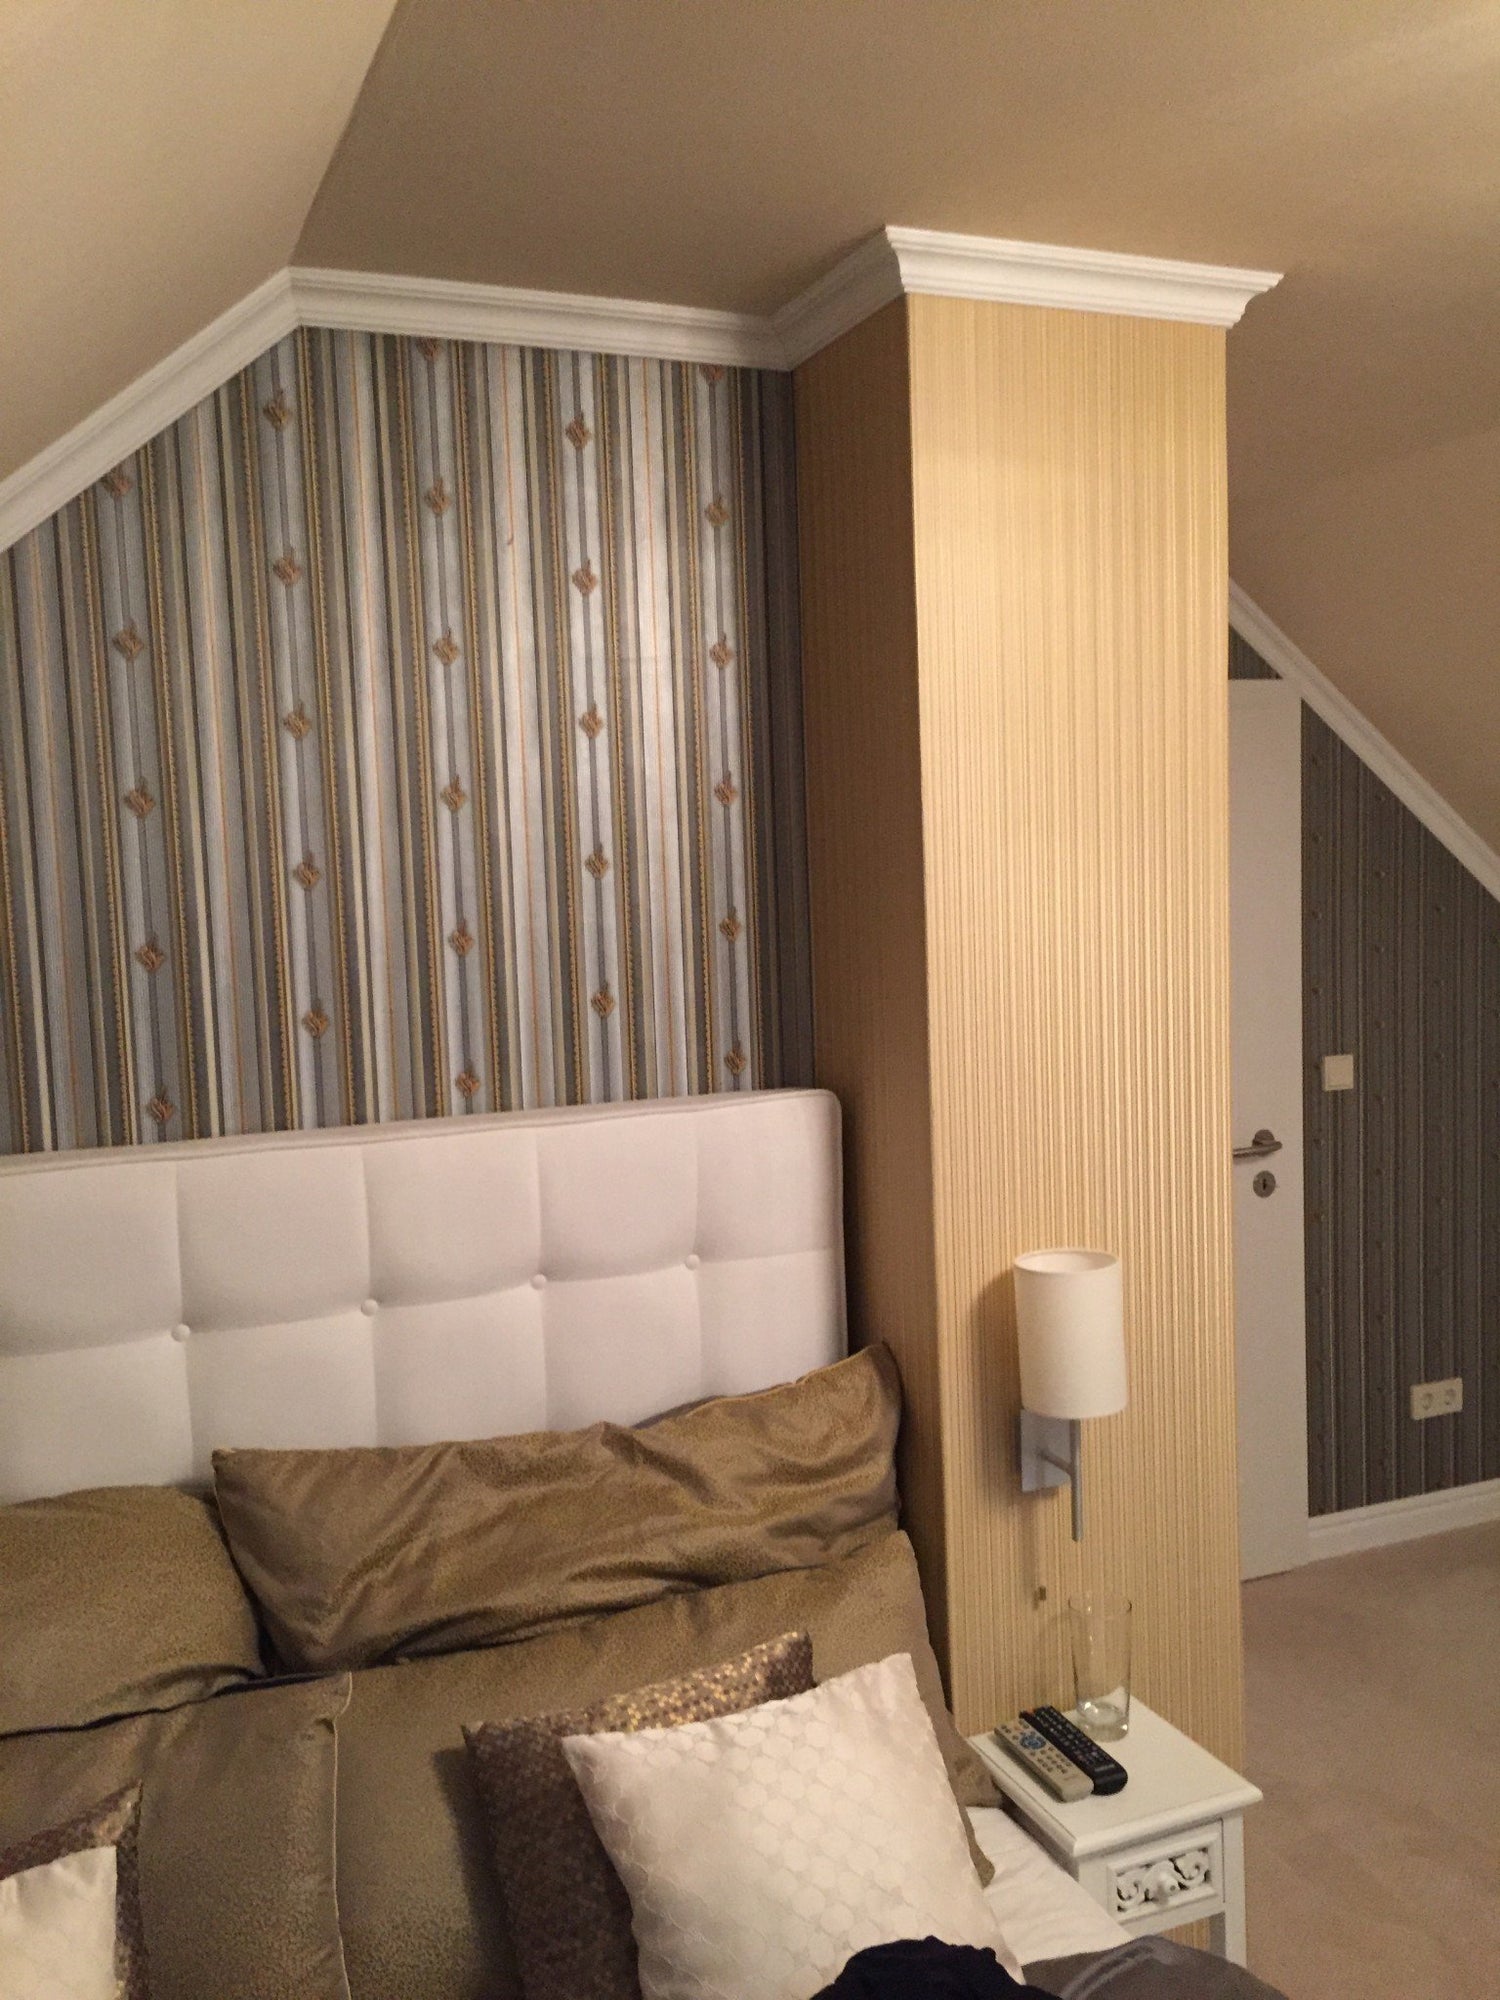 Orlando - Modern Coving in a bedroom